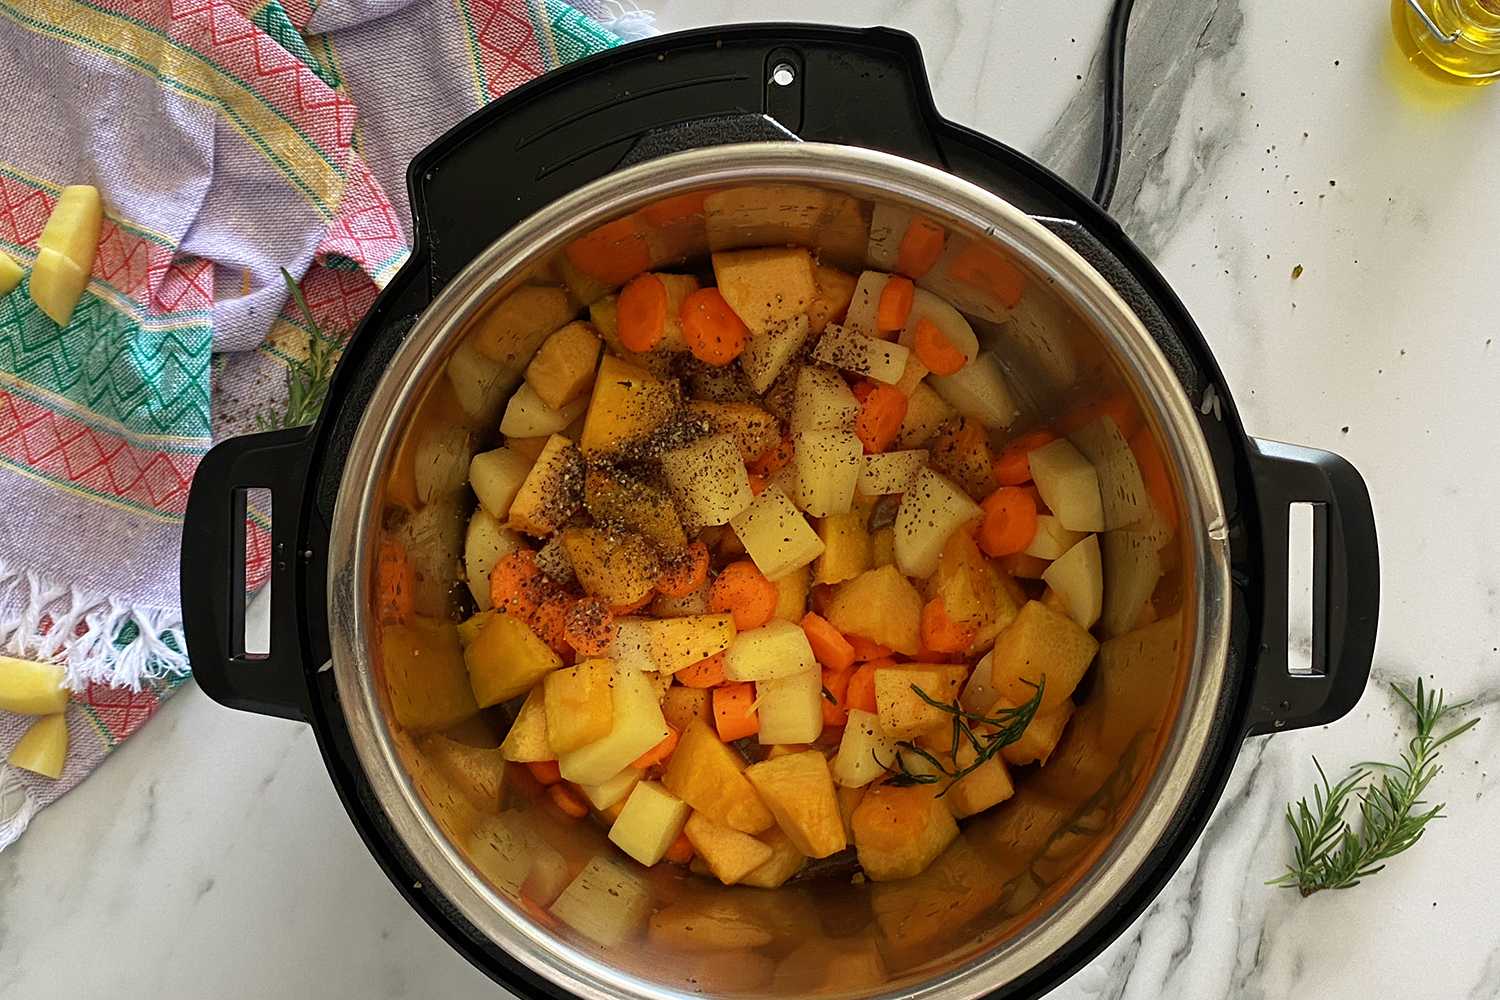 How To Steam Vegetables In Instant Pot Without Steamer Basket